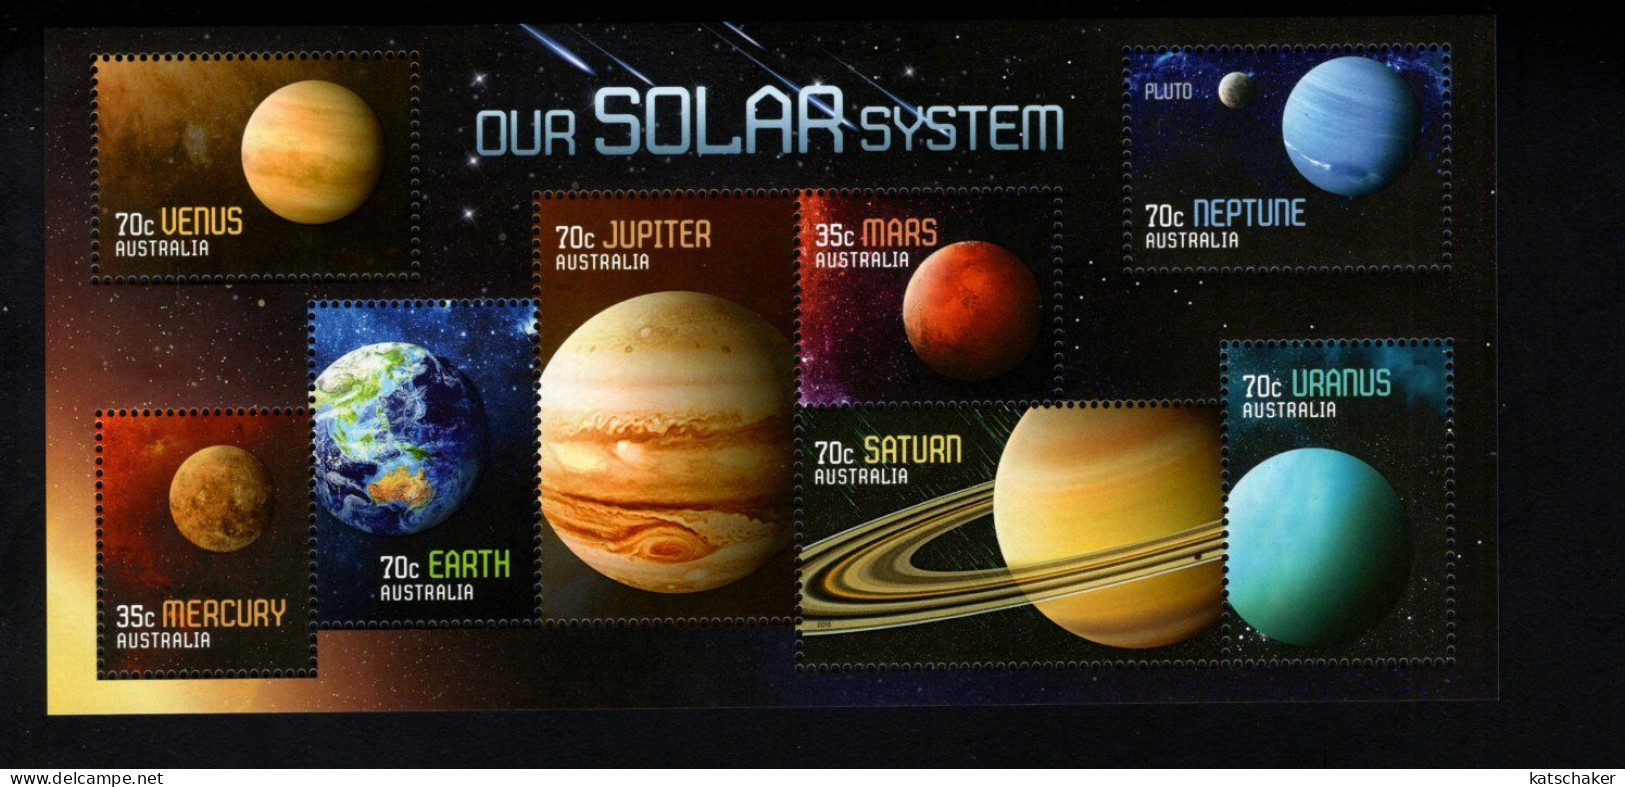 1927704582 2015 SCOTT 4356 (XX) POSTFRIS MINT NEVER HINGED EINWANDFREI - PLANETS - OUR SOLAR SYSTEM - Mint Stamps